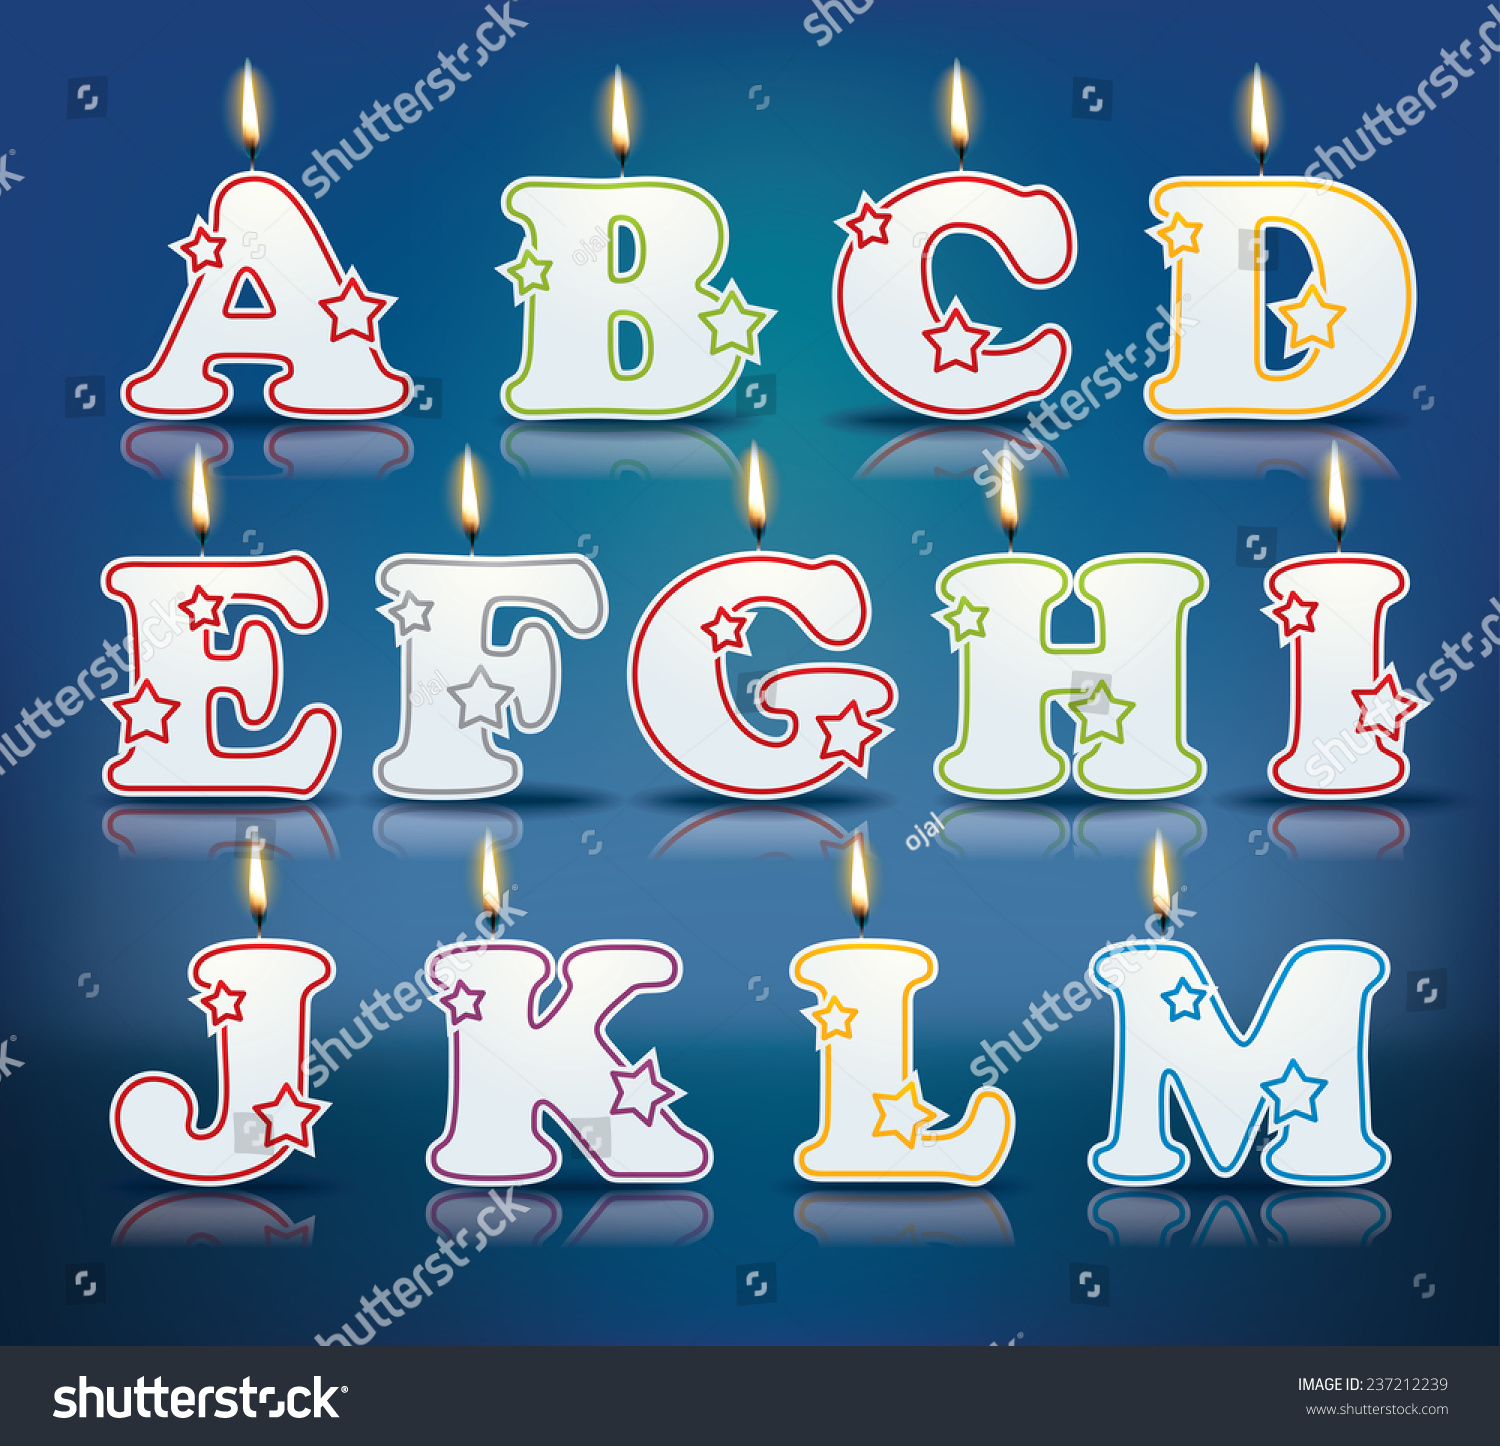 SVG of Candle letters from A to M with flames - eps 10 vector illustration svg